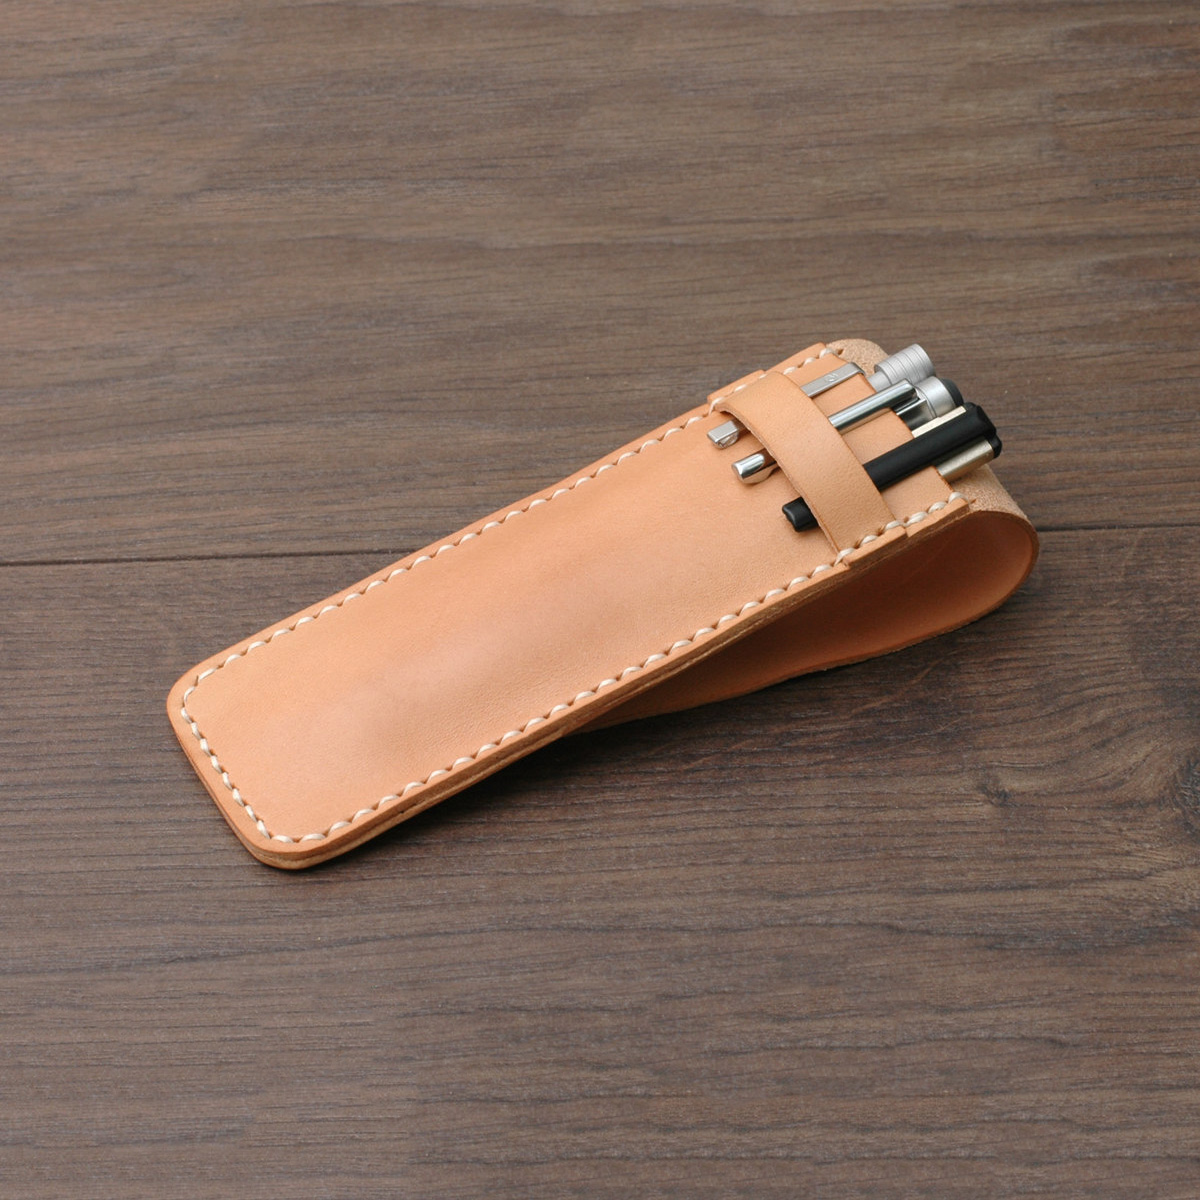 Natural leather style goods items for men work gift for business partner